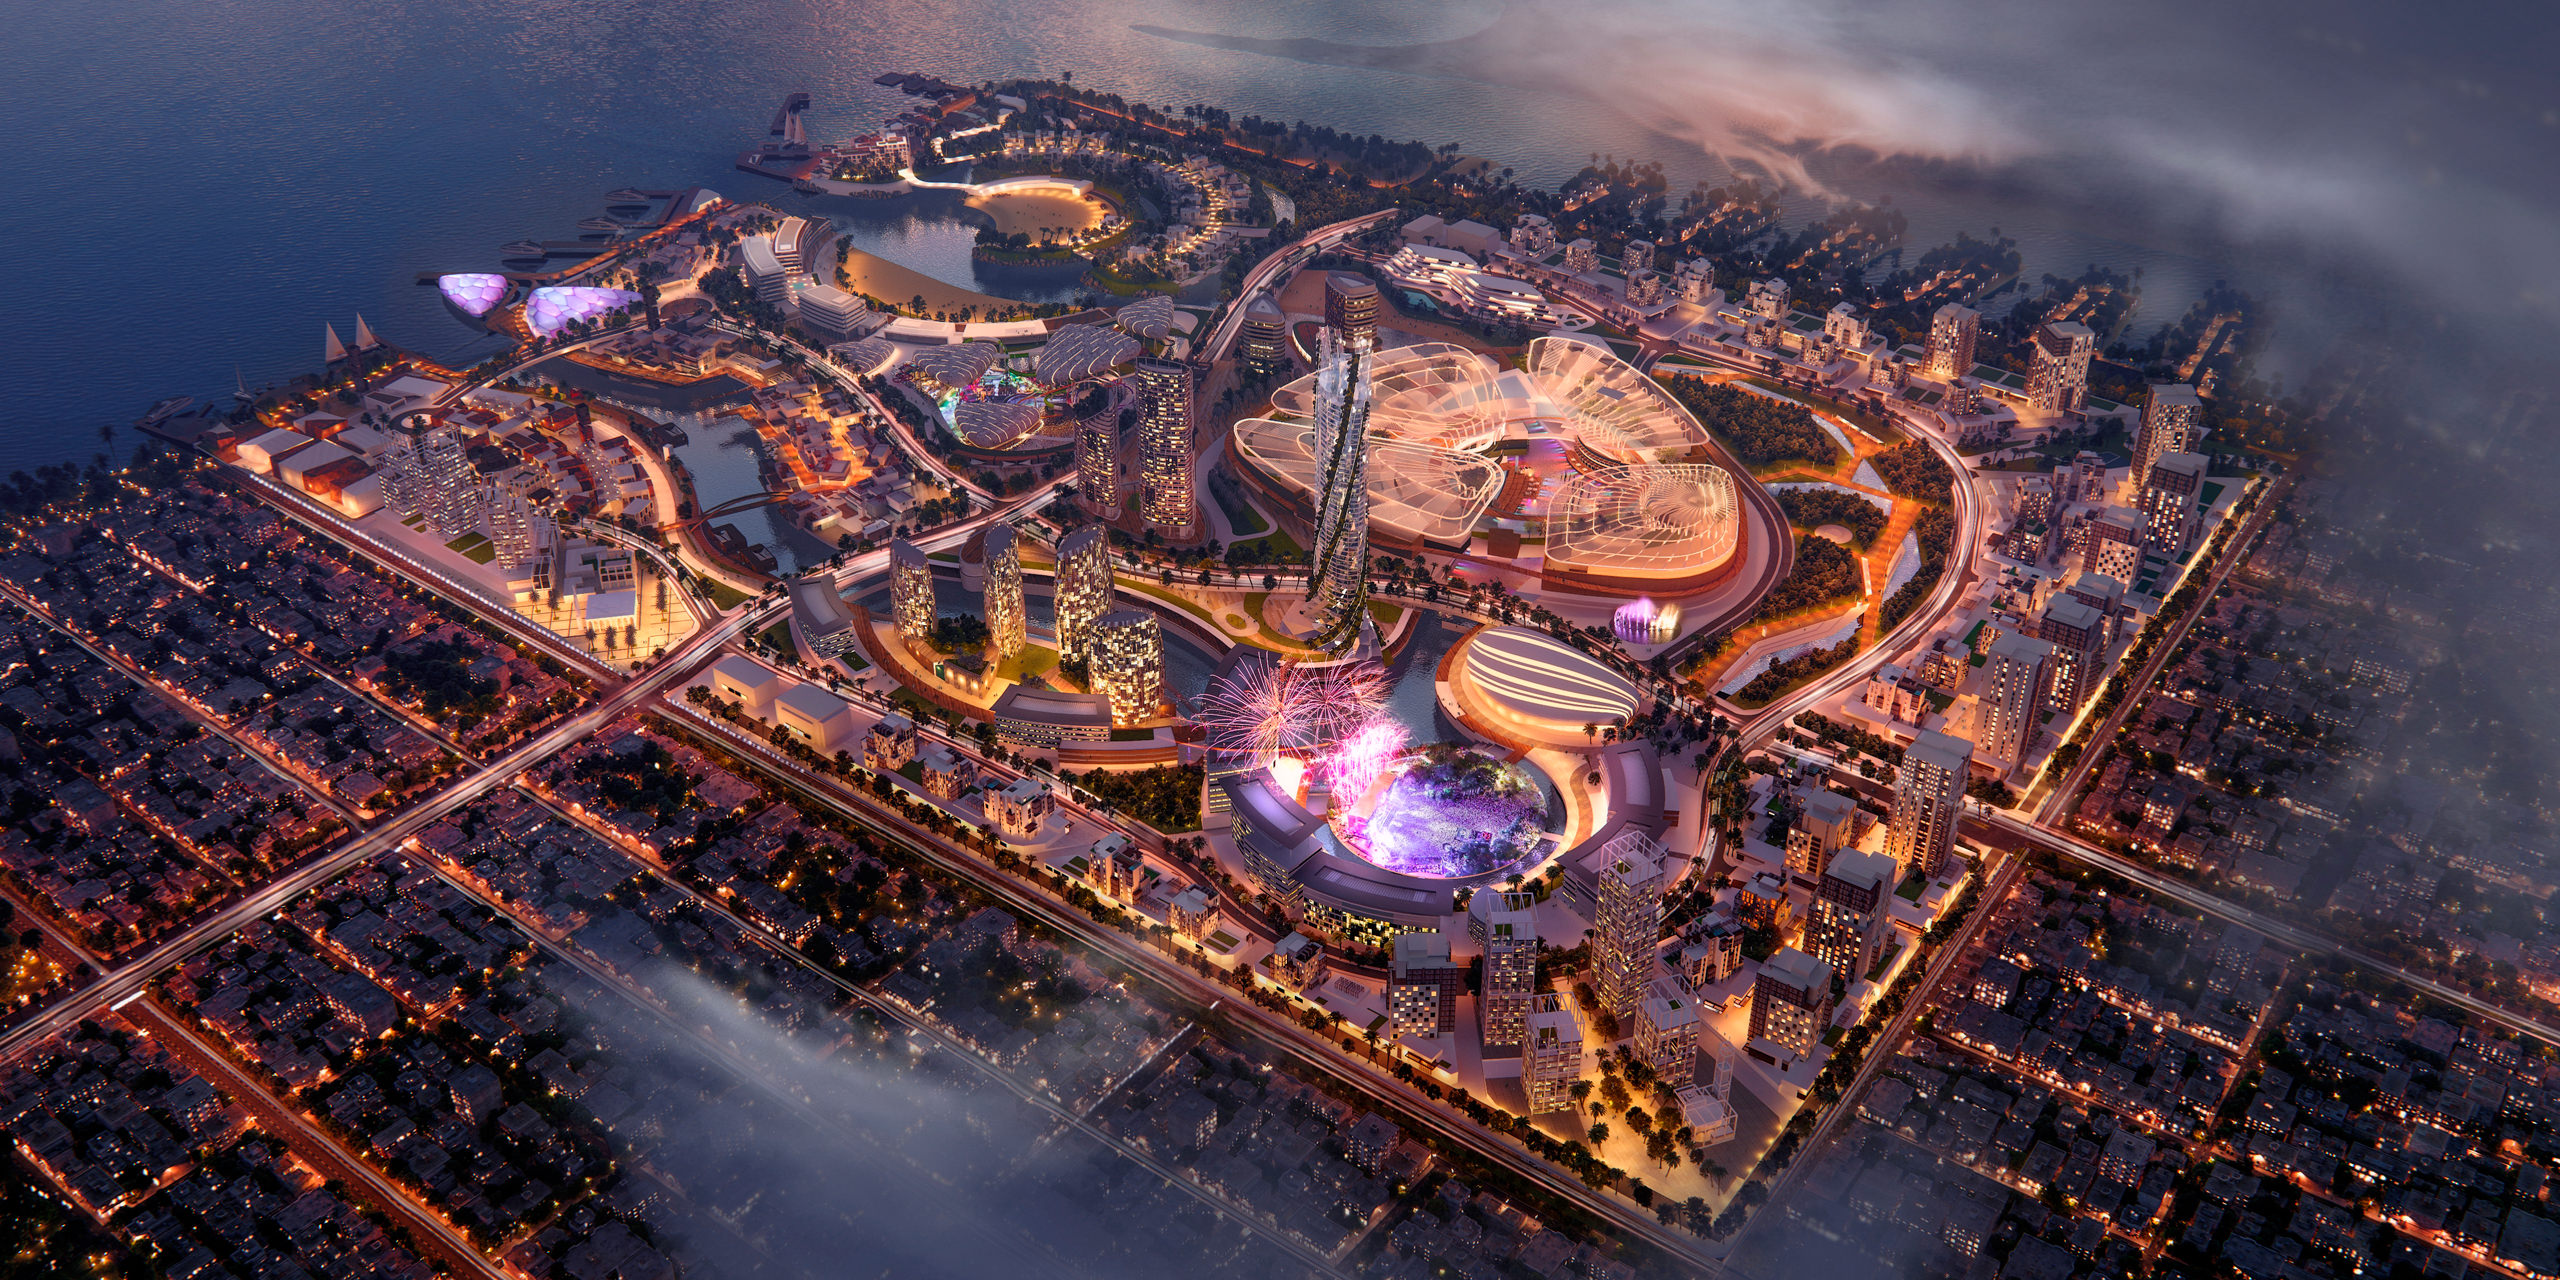 3D rendering of modern illuminated residential district with a water park from a bird’s eye perspective at night